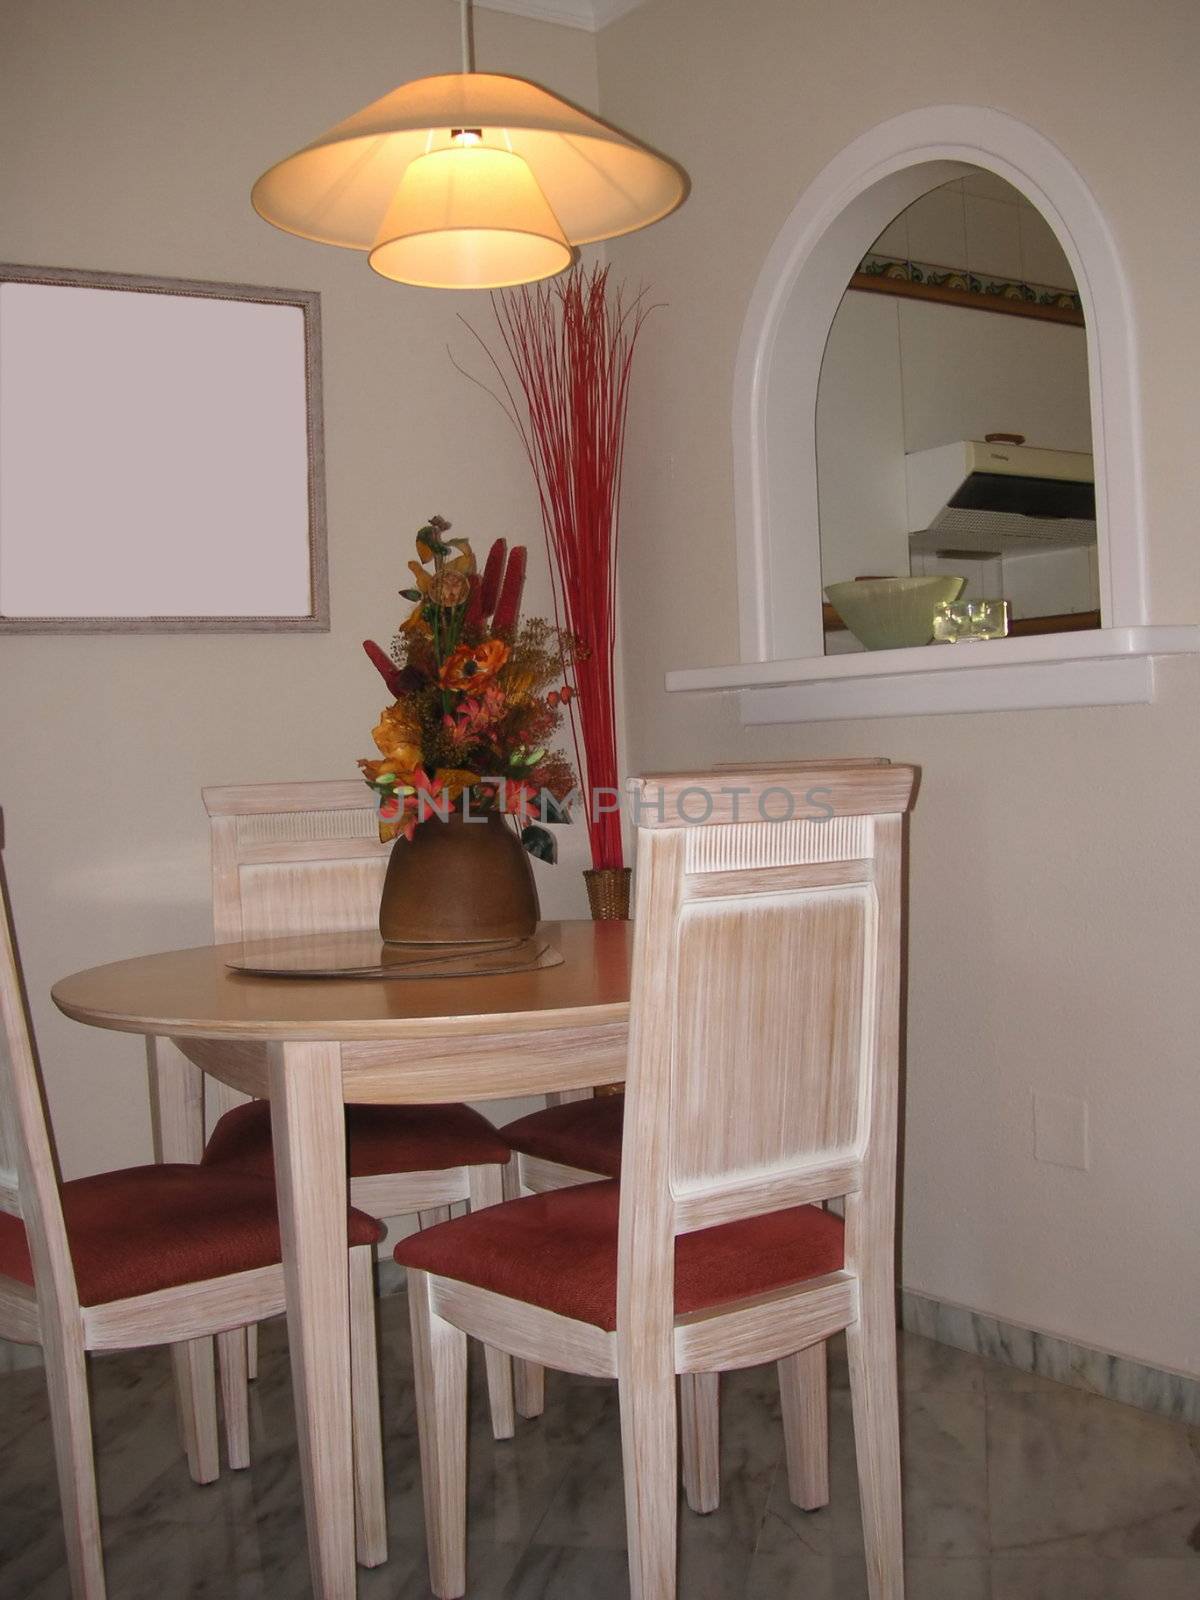 dining area by leafy